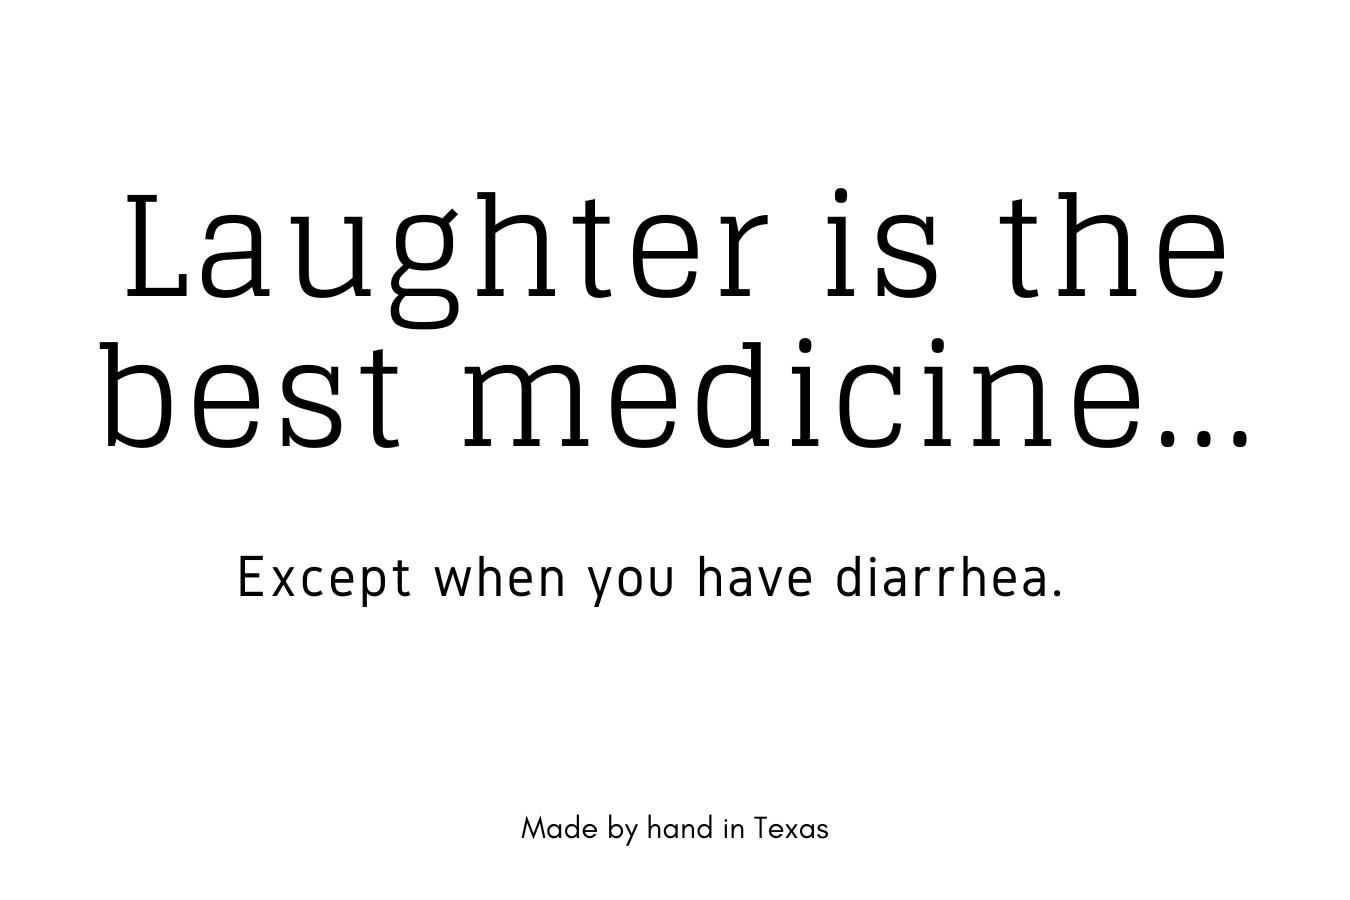 Laughter is the best medicine, except when you have diarrhea.